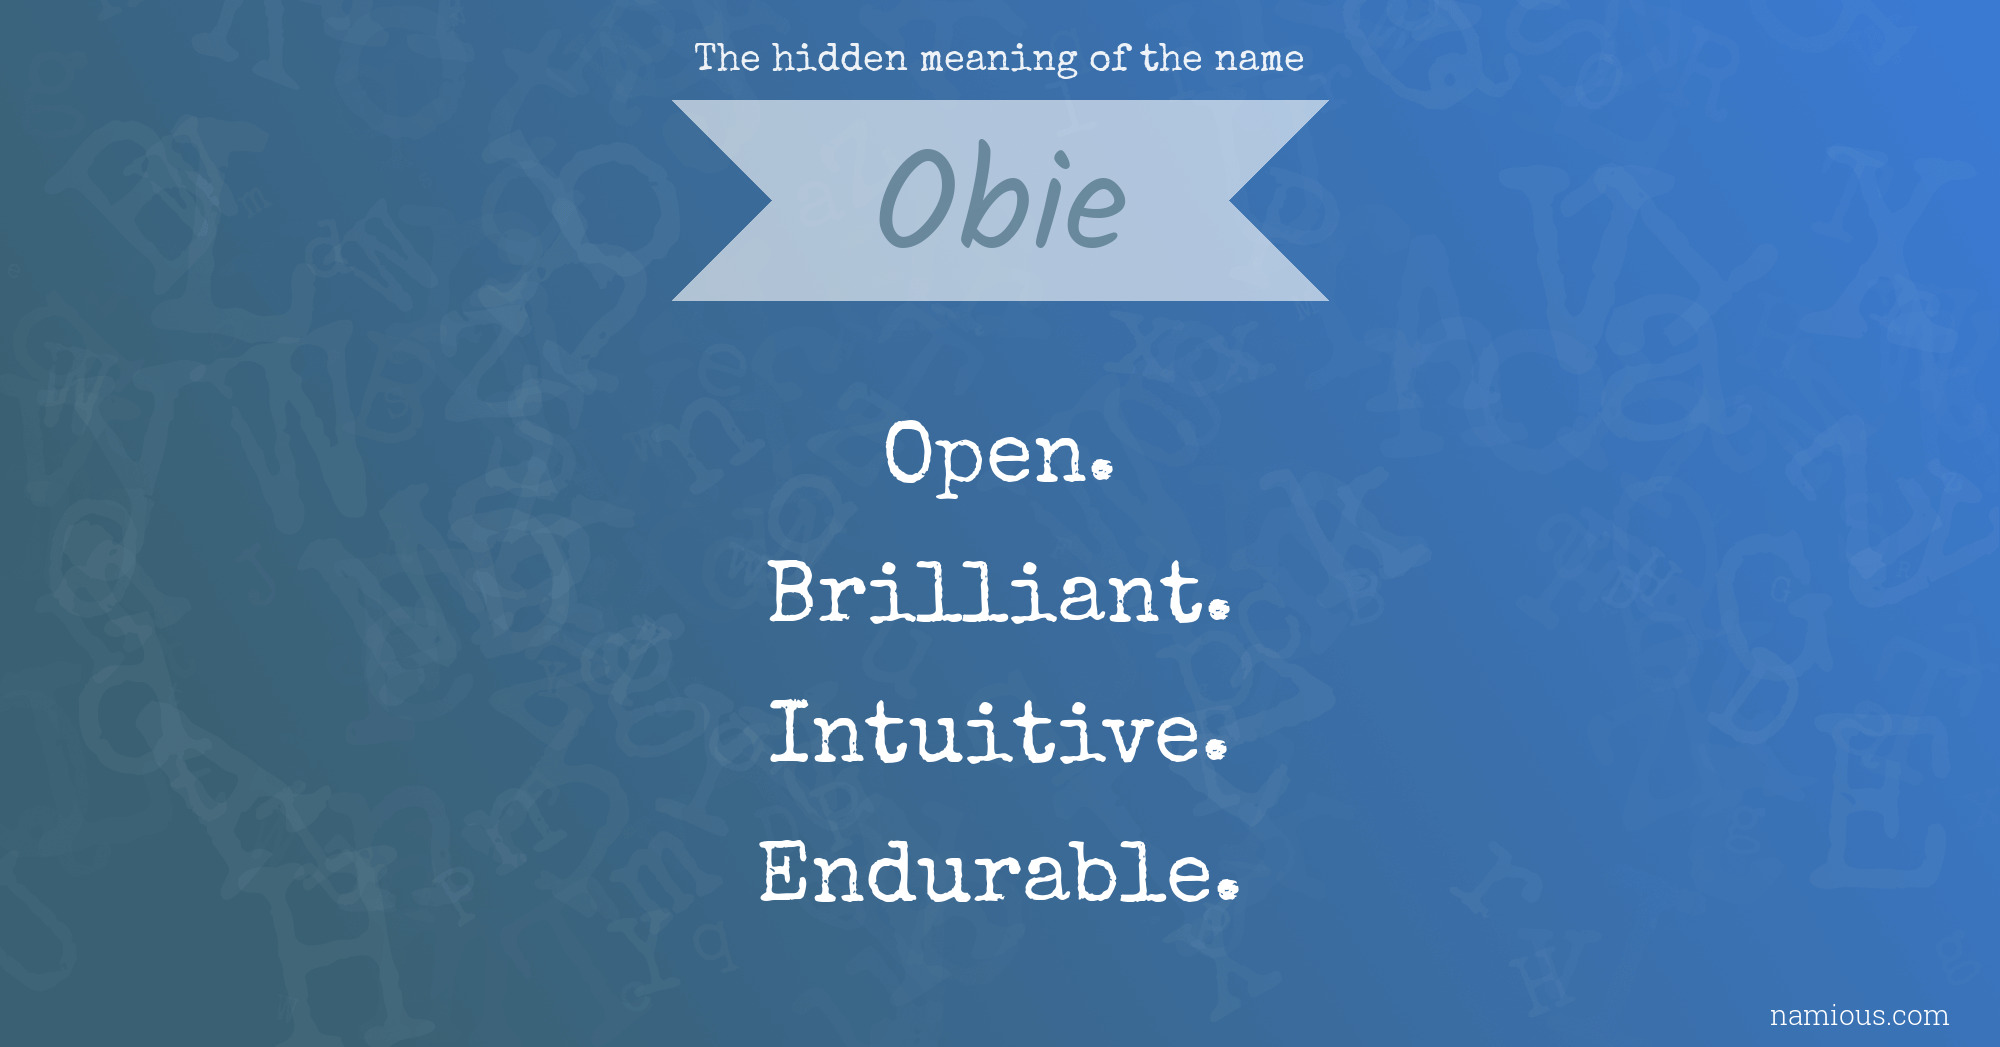 The hidden meaning of the name Obie